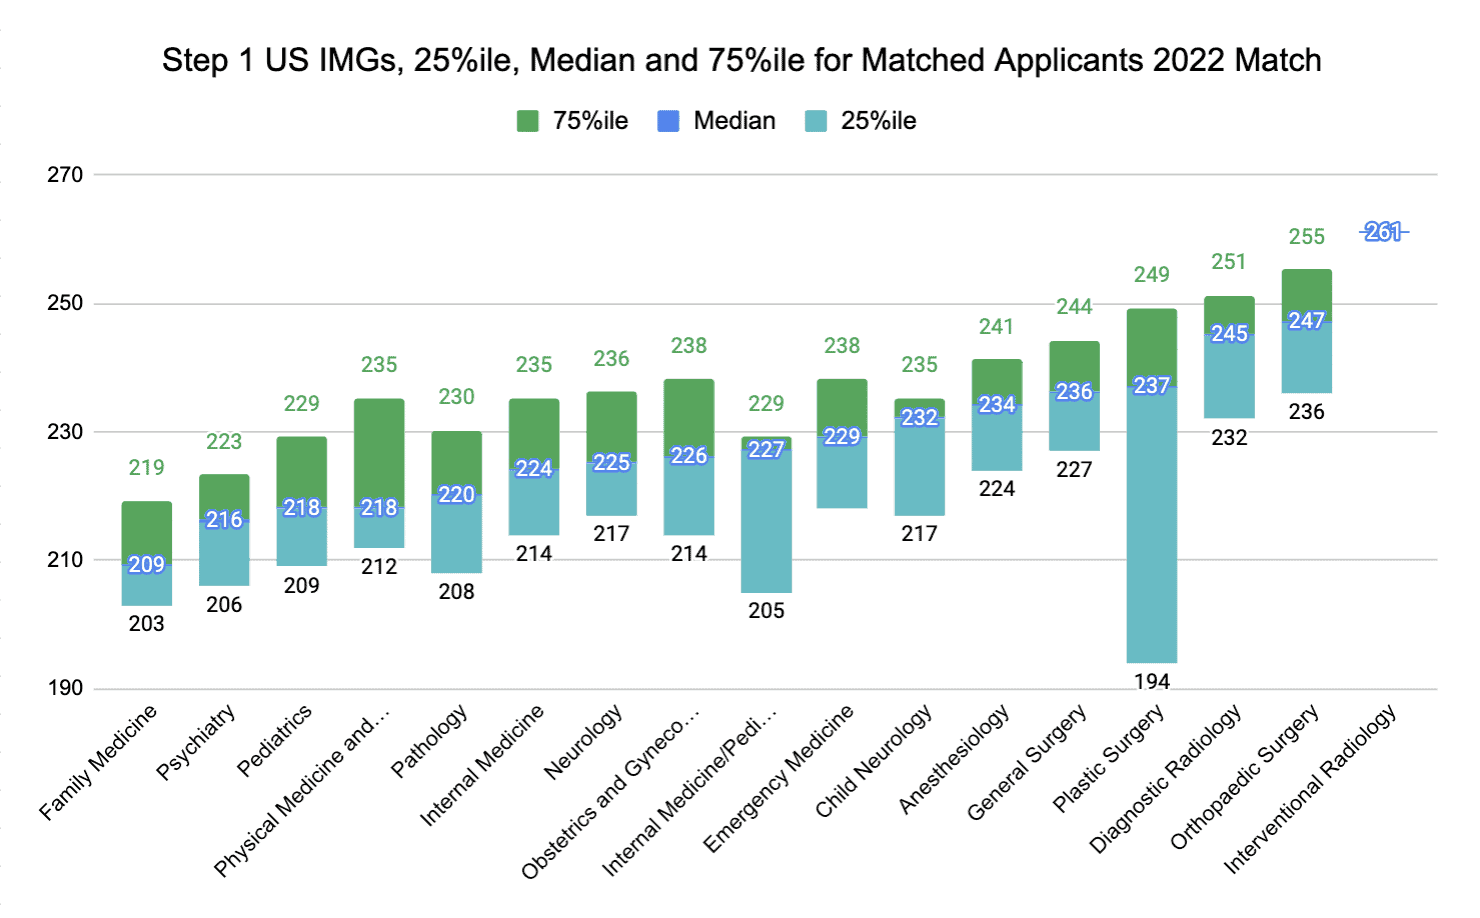 Step 1 US IMGs, 25%ile, Median and 75%ile for Matched Applicants 2022 Match